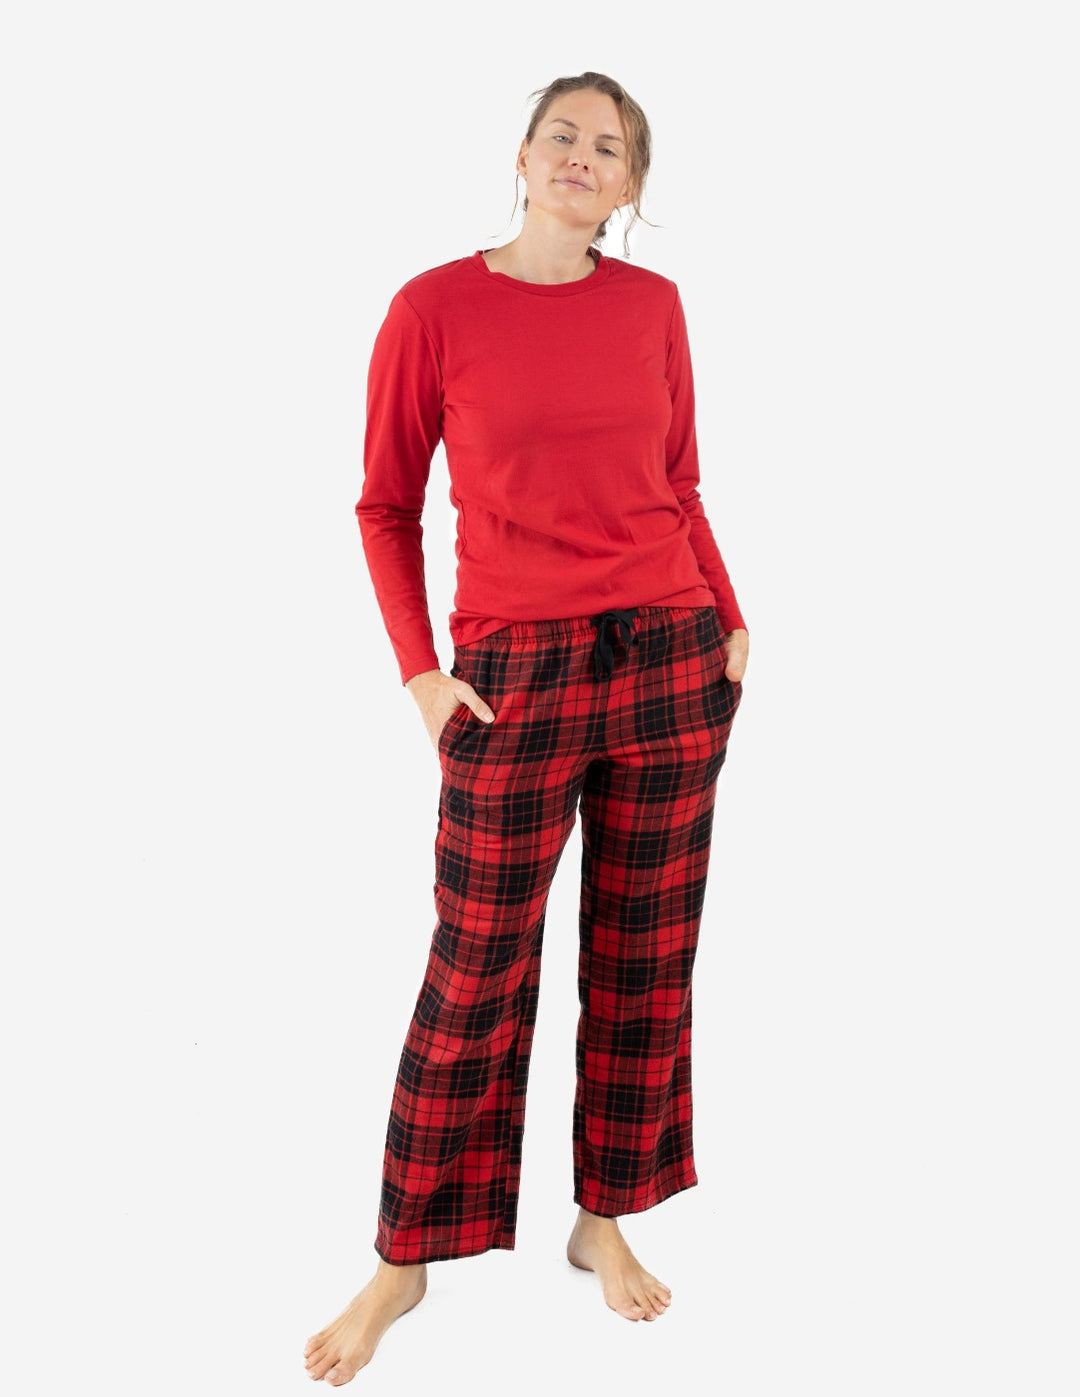 red and black plaid flannel and cotton women's pajama set